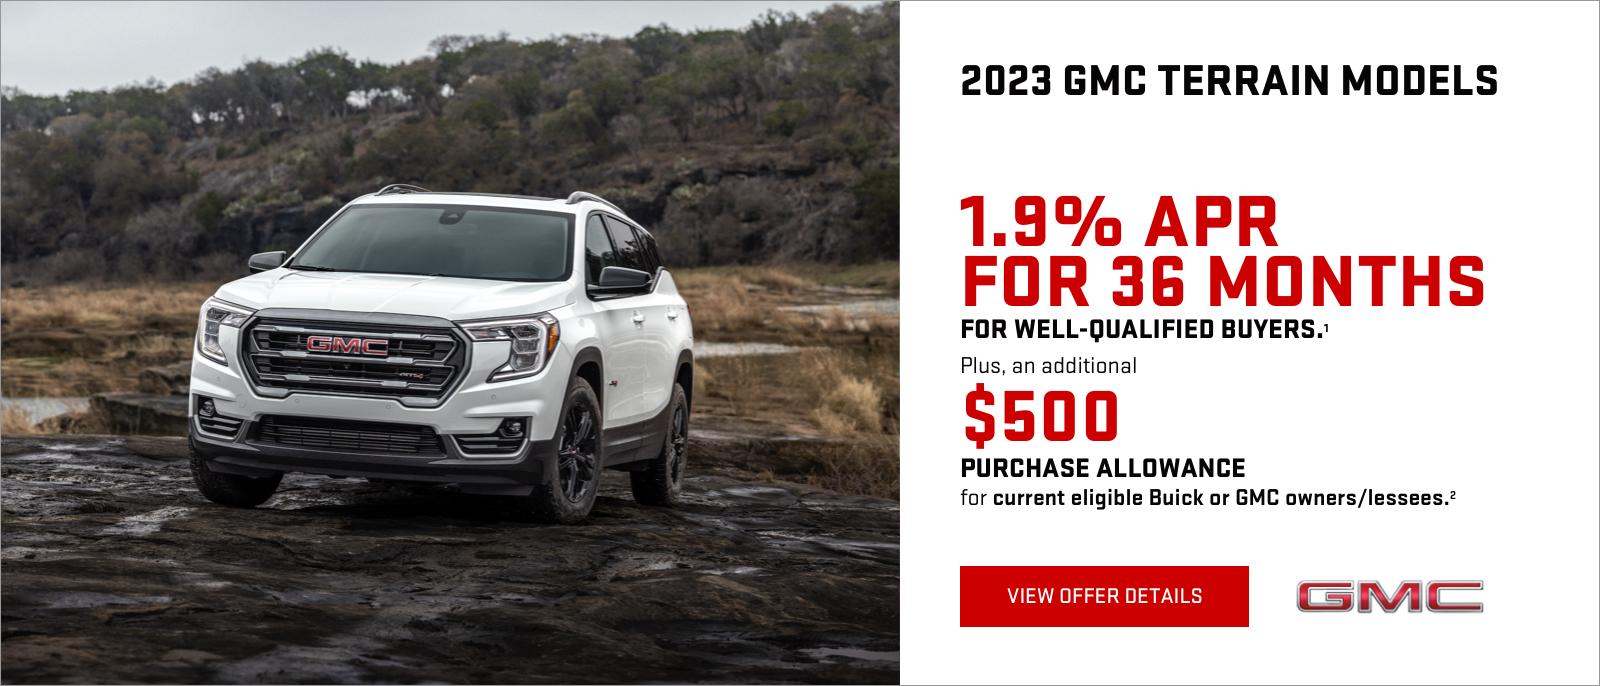 1.9% APR for 36 MONTHS for well-qualified buyers.1

Plus, an additional $500 PURCHASE ALLOWANCE for current eligible Buick or GMC owners/lessees.2